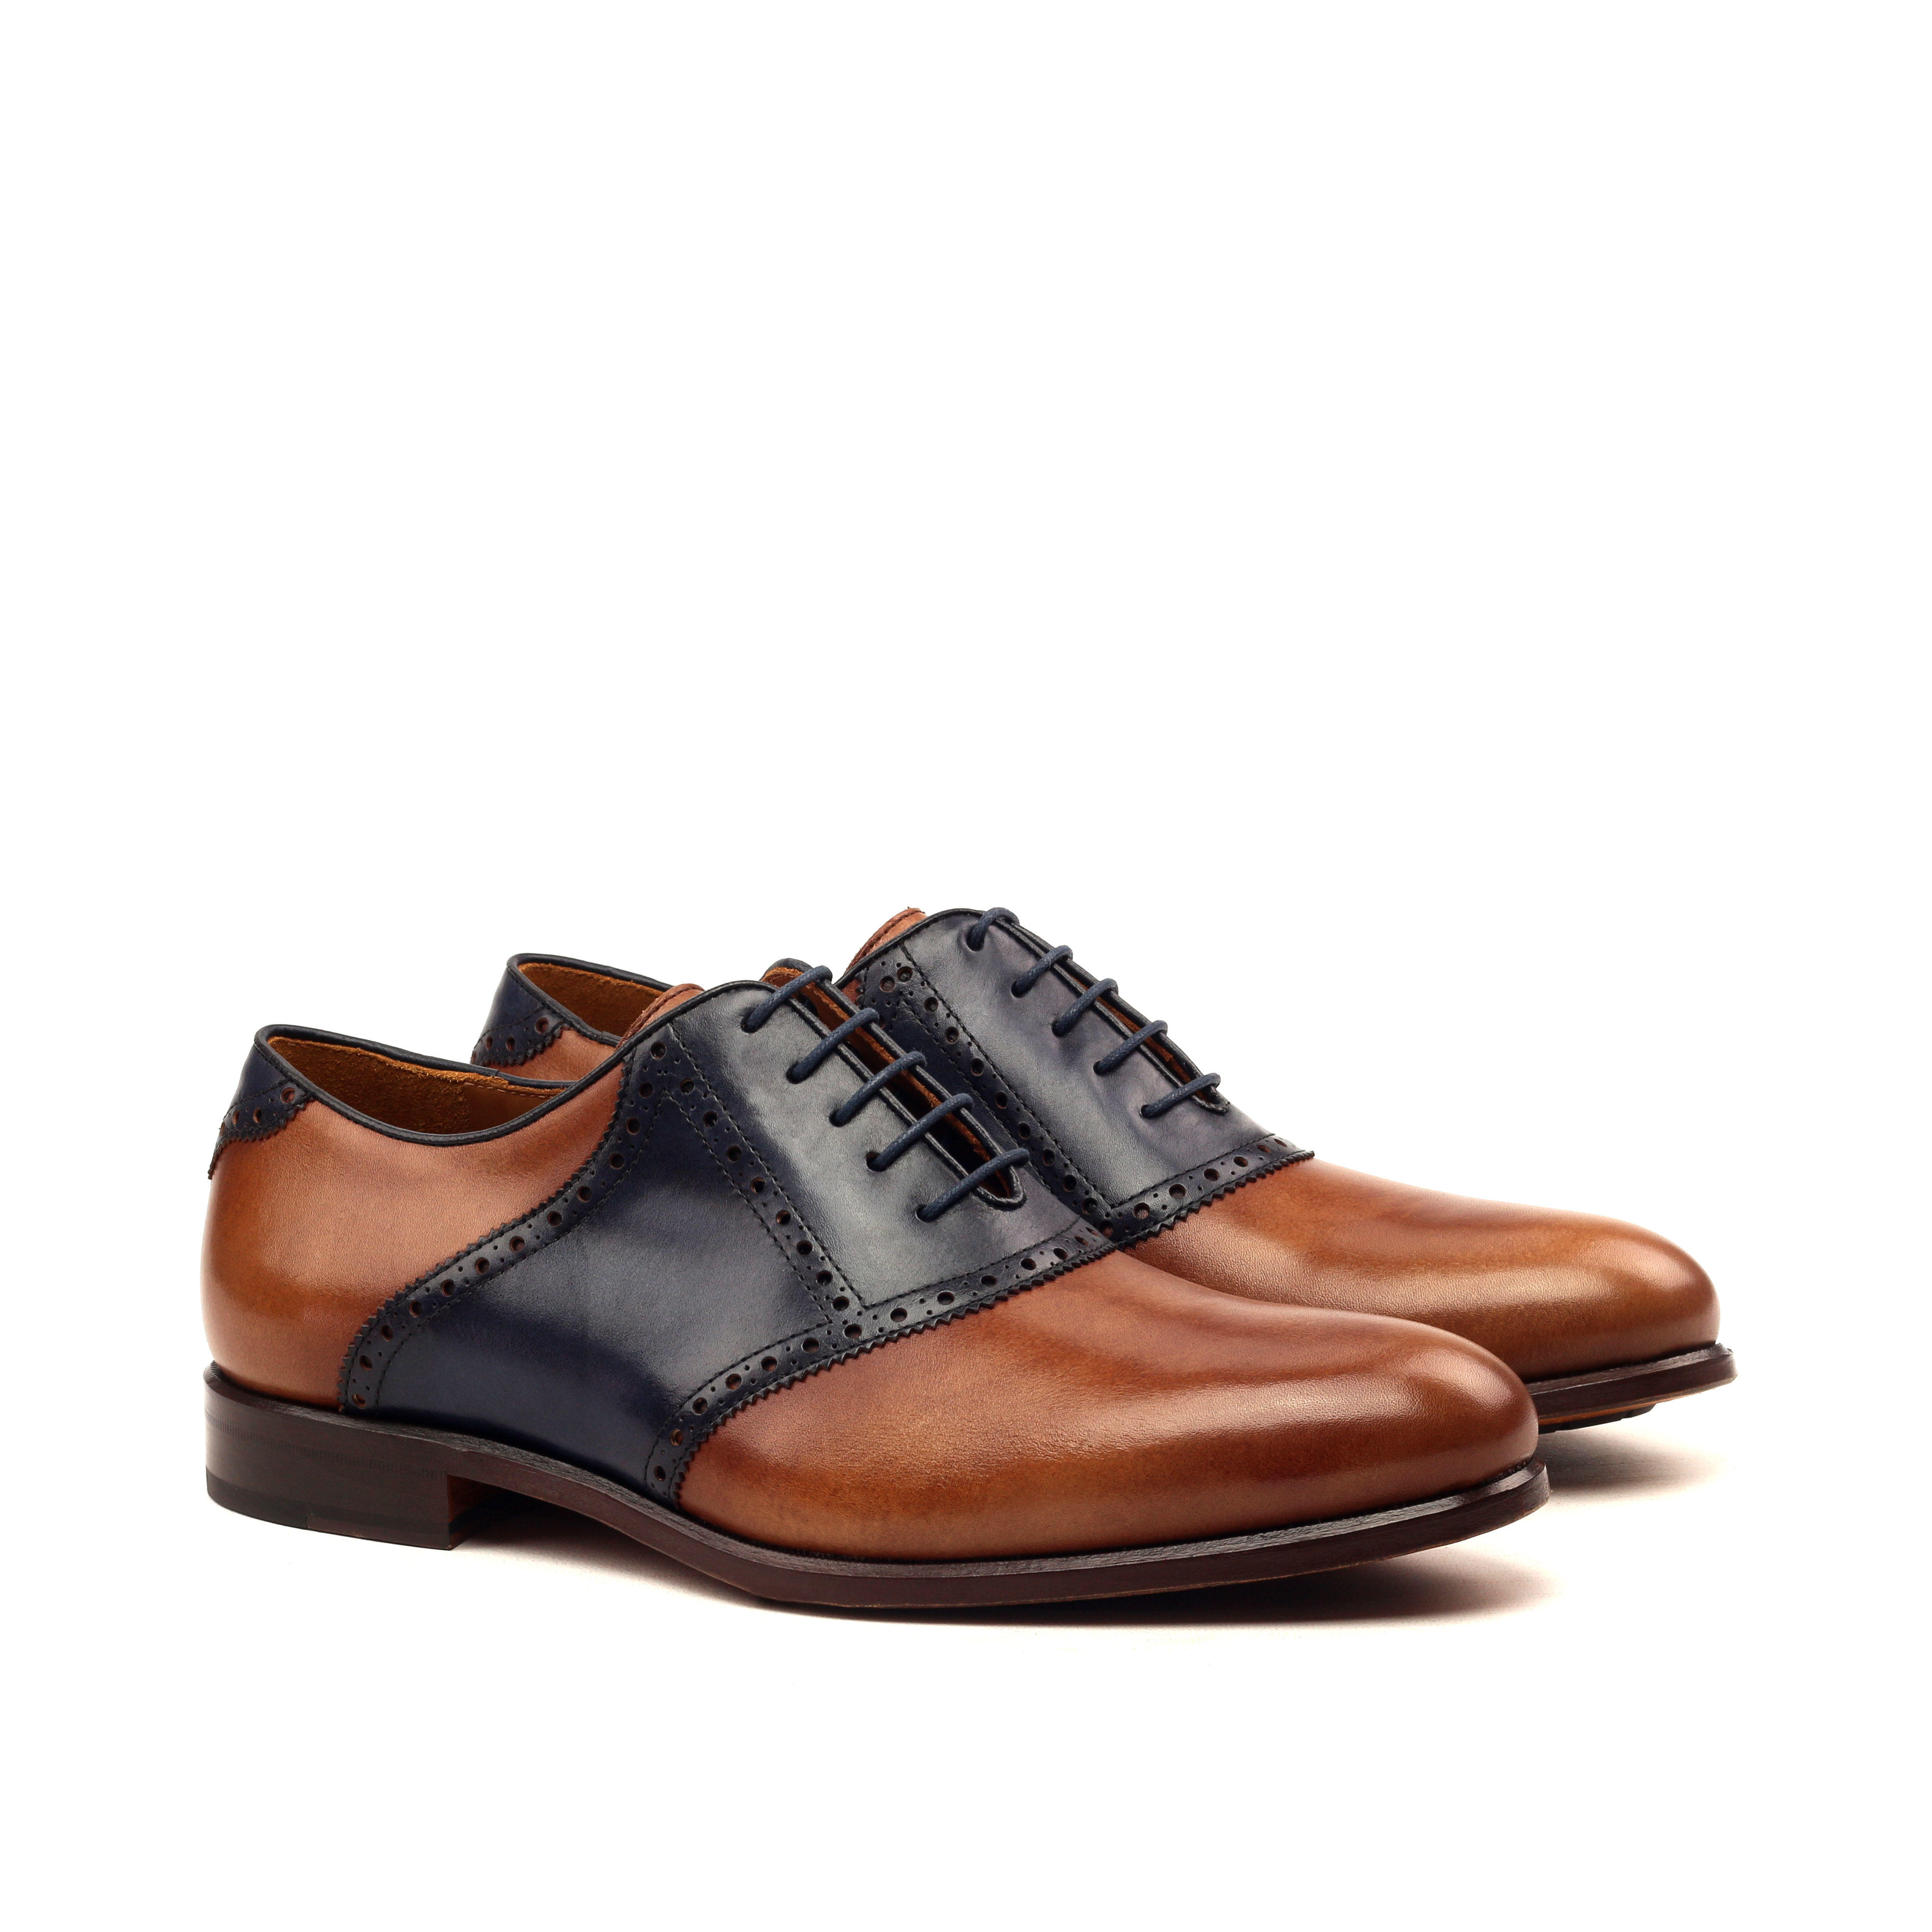 MANOR OF LONDON ''The Saddle' Navy & Brown Painted Calfskin Shoe Luxury Custom Initials Monogrammed Front Side View